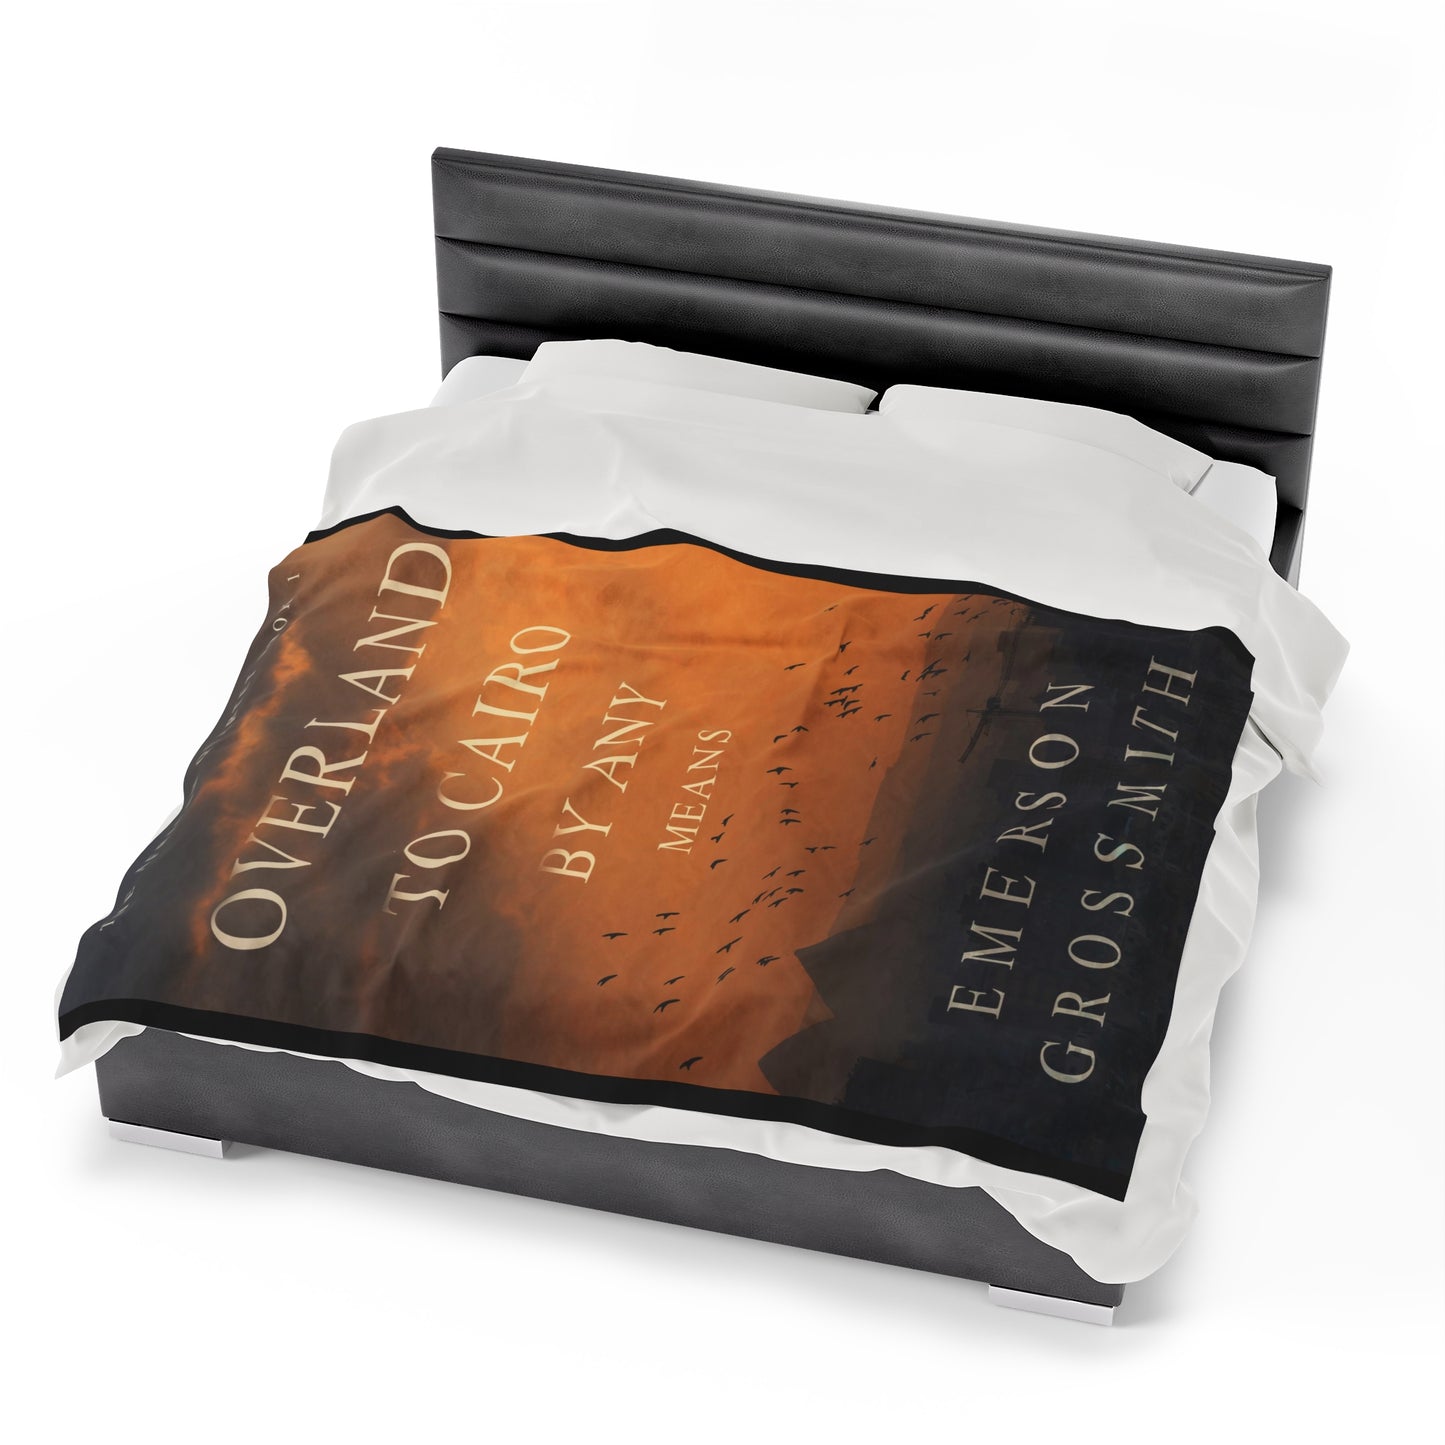 Overland To Cairo By Any Means - Velveteen Plush Blanket